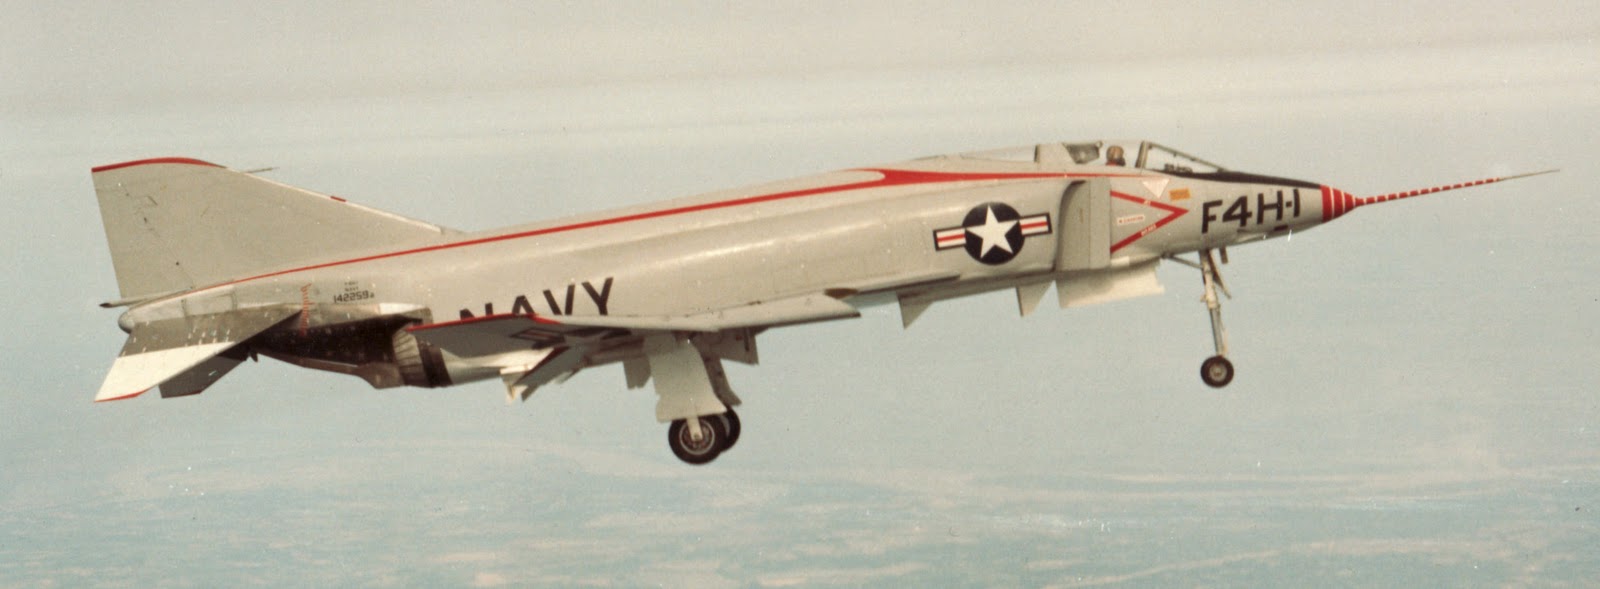 The McDonnell YF4H-1 Bu. No. 142259 on its first flight 27 May 1958.